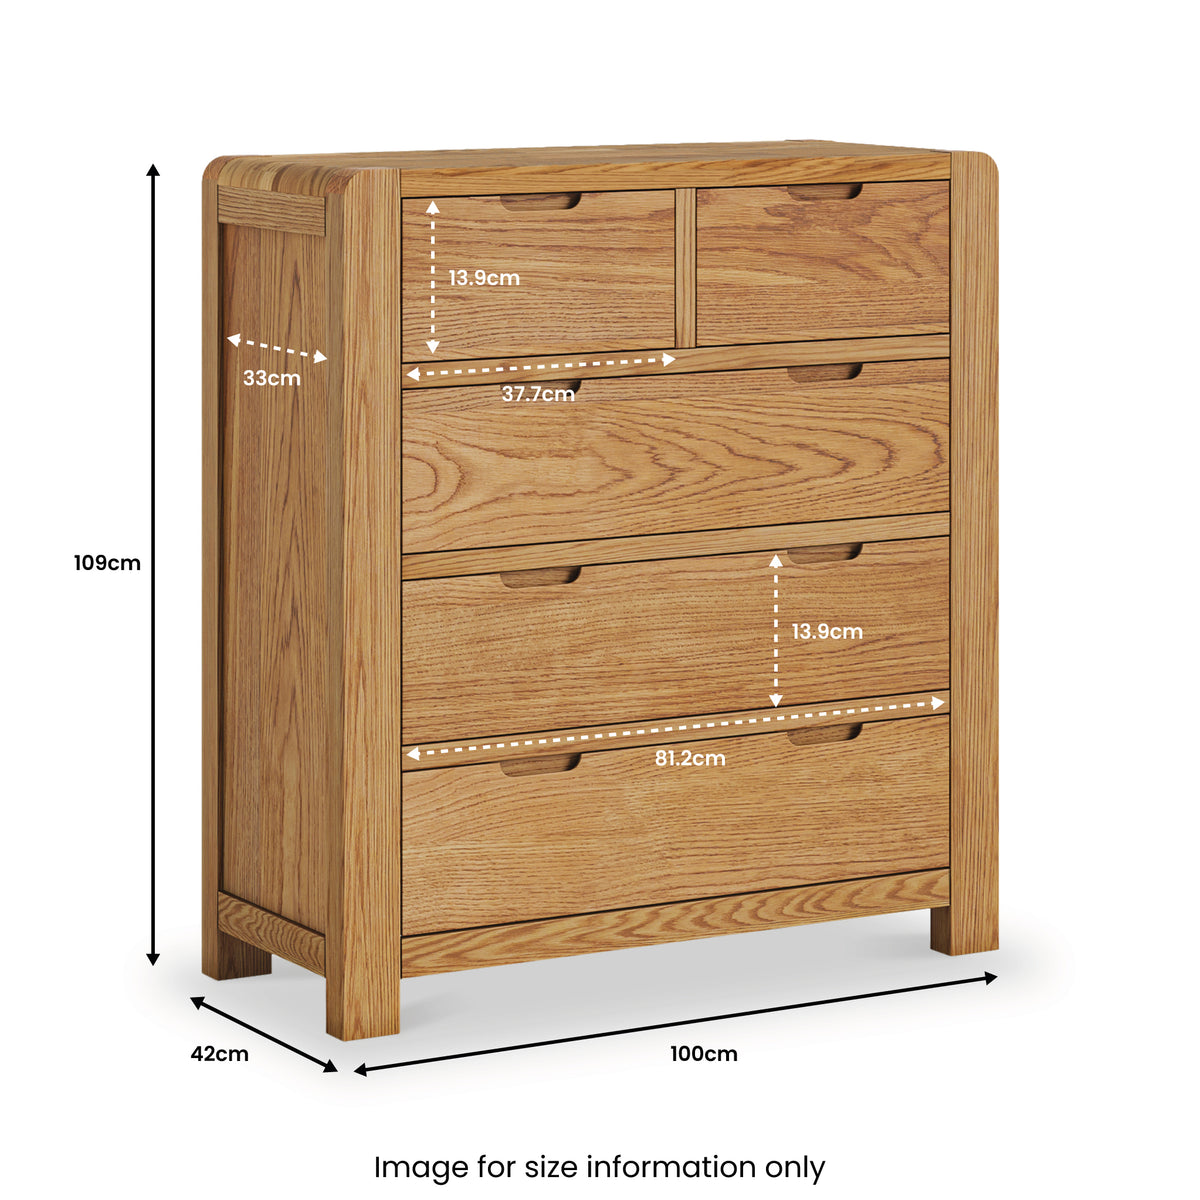 Harvey Oak 2 Over 3 Chest of Drawers dimensions